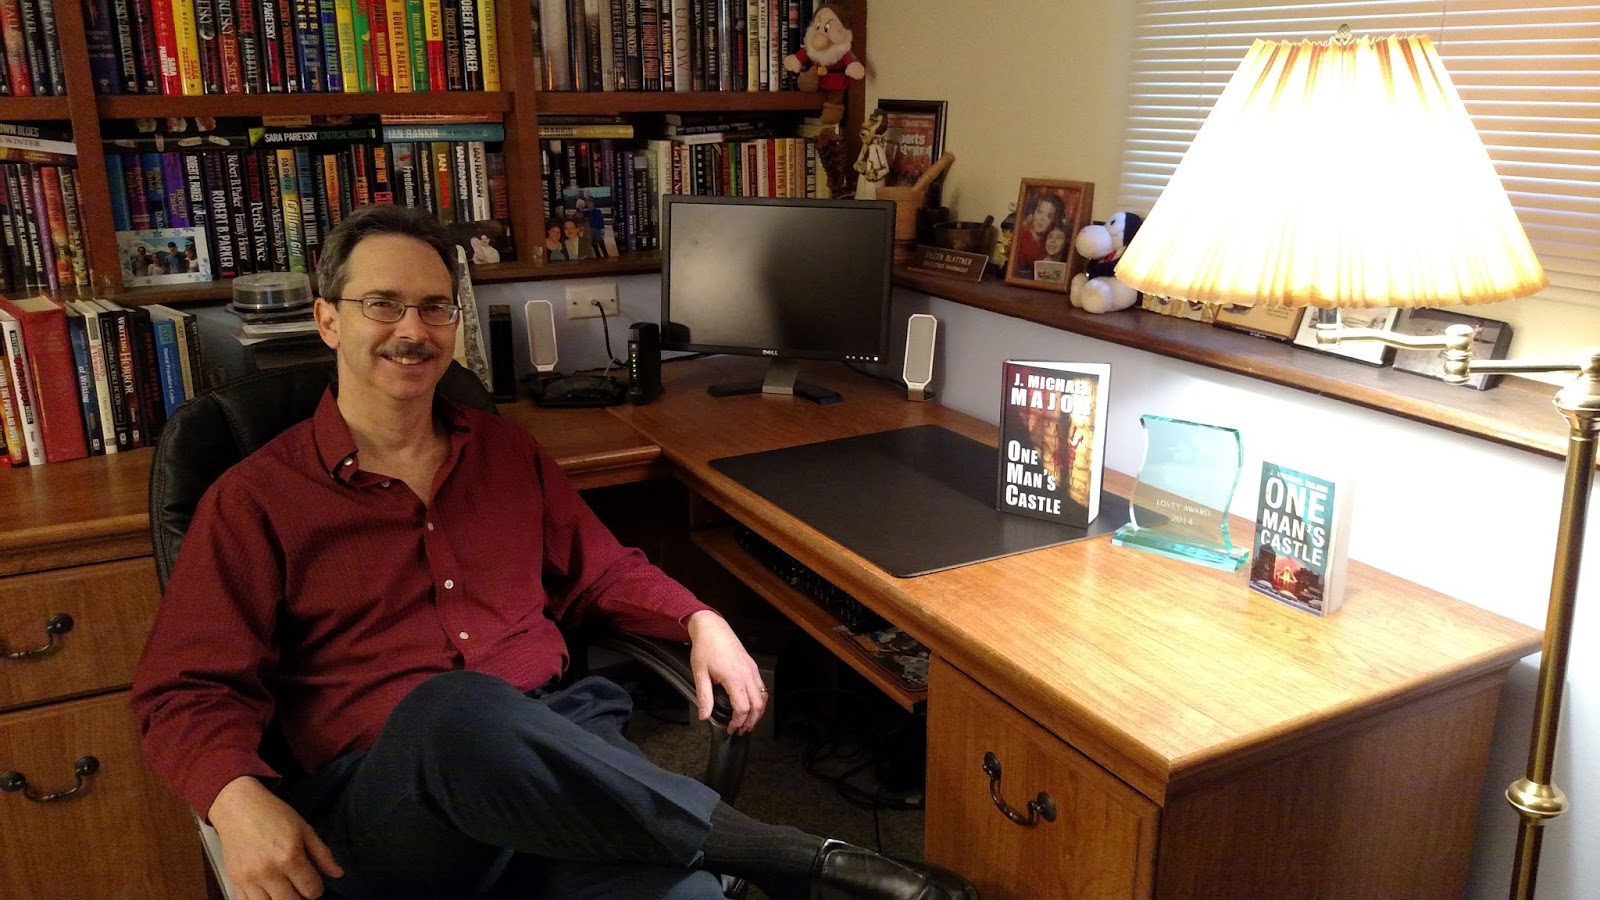 Author J. Michael Major is seated at his writing desk.